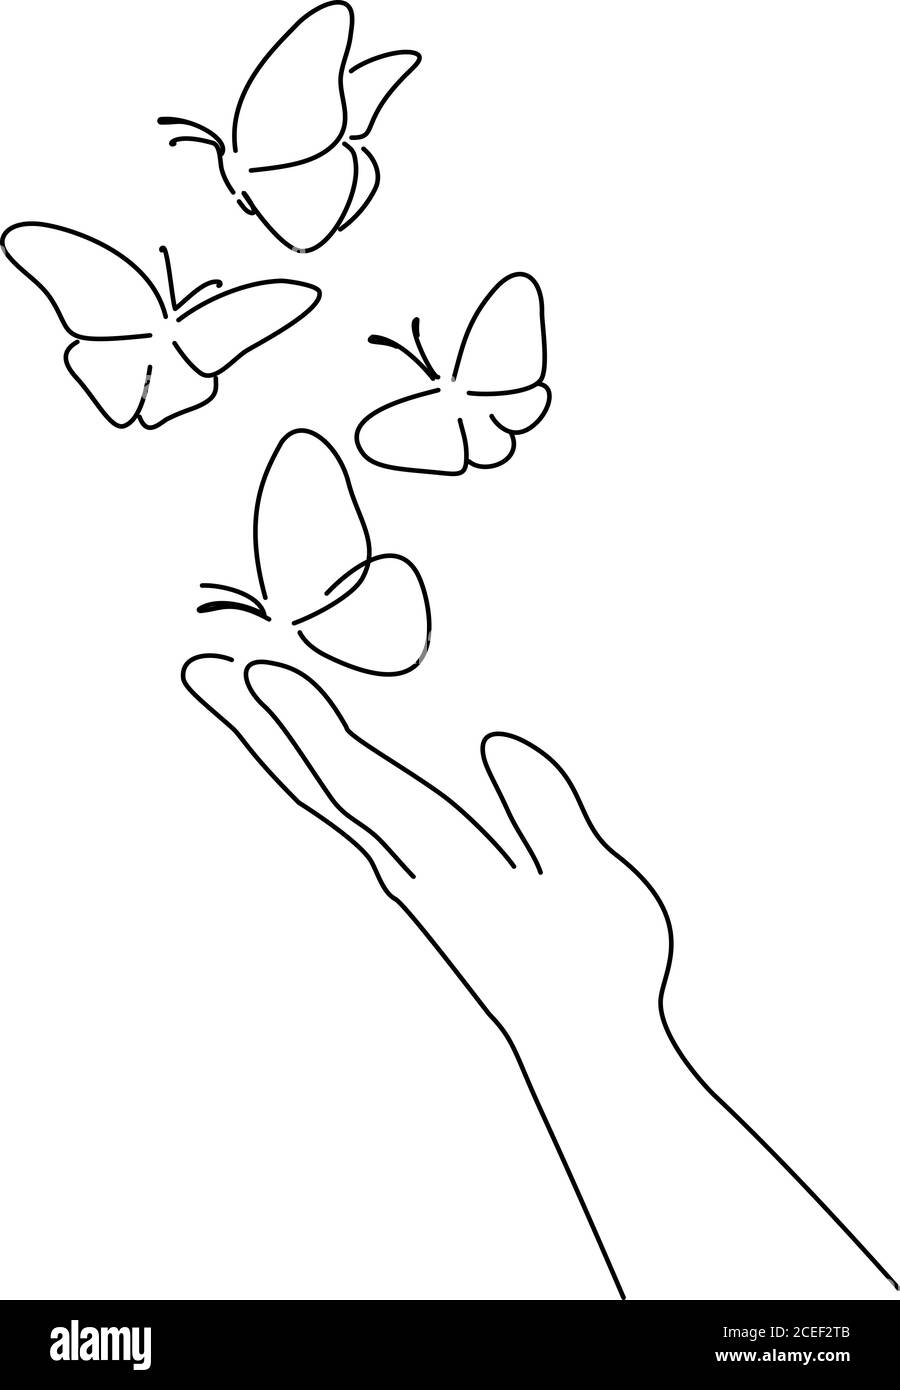 Hand with butterfly on finger. Line art drawing style. Black linear sketch isolated on white background. Vector illustration Stock Vector